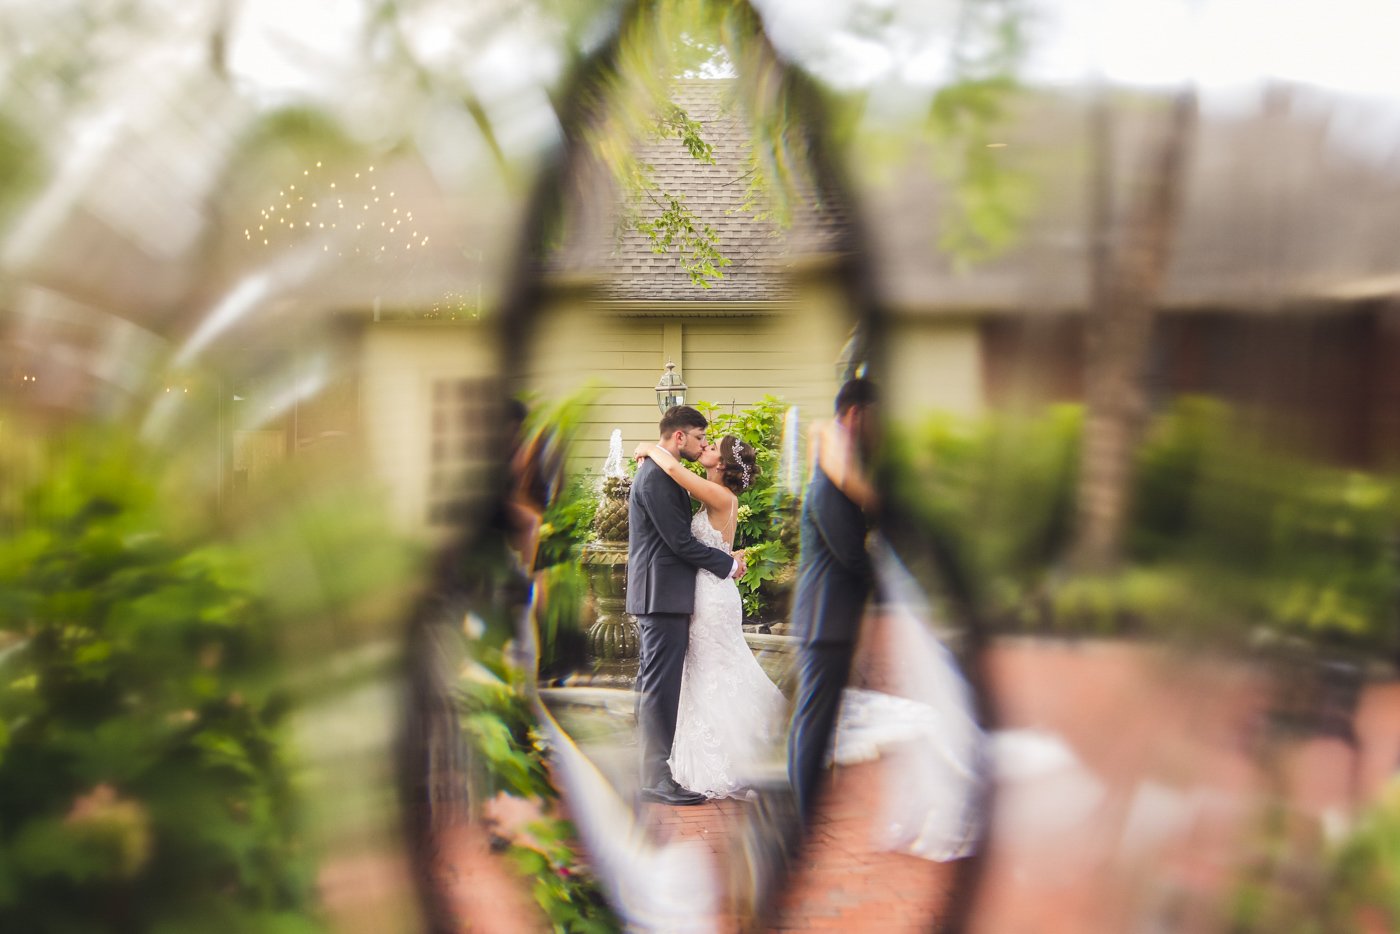 bride and groom kissing outside seen through glass in door